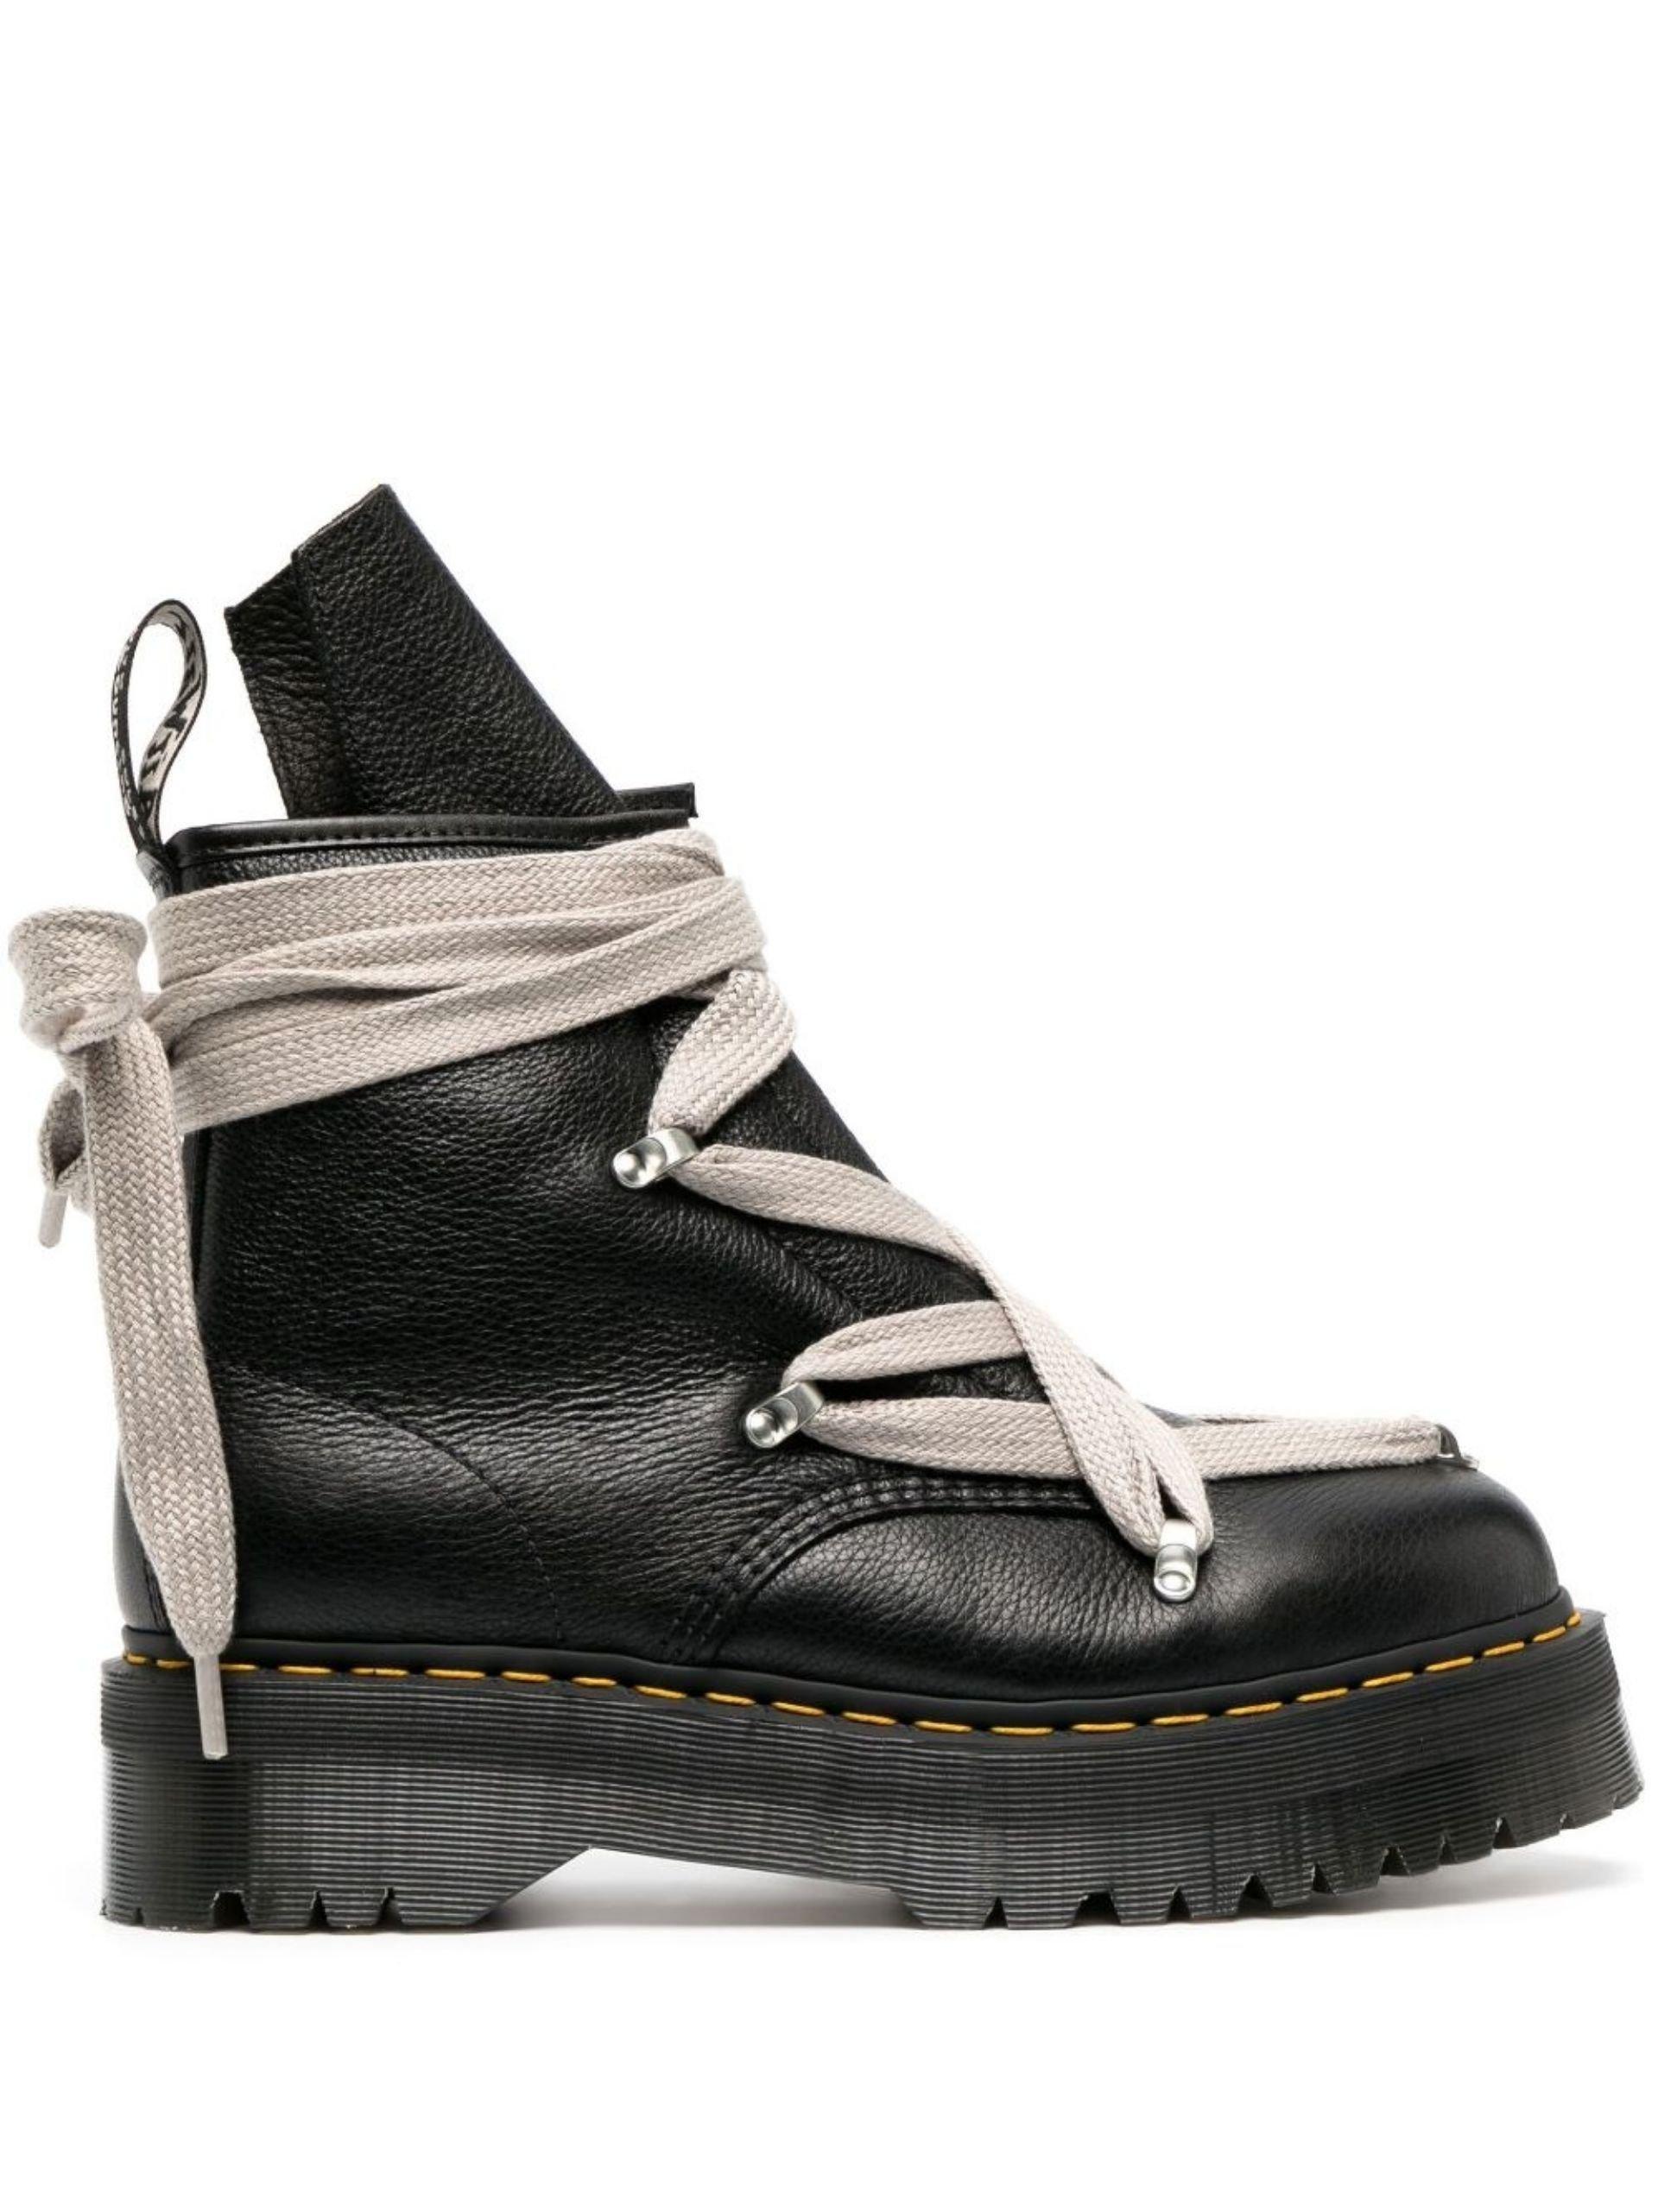 Rick Owens X Dr. Martens Lace-up Leather Boots in Black for Men | Lyst